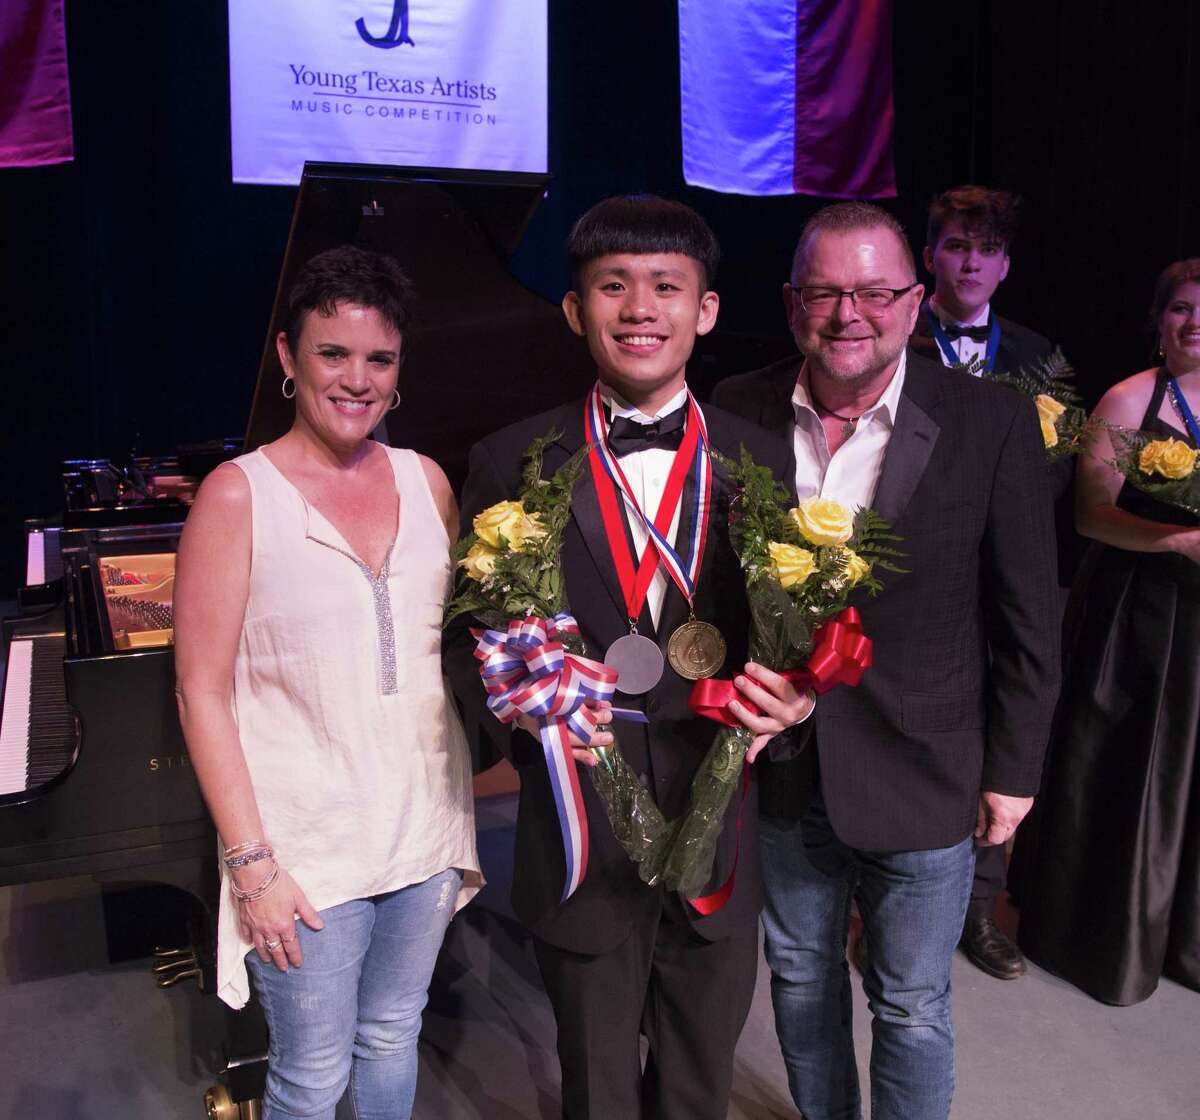 Pictured is Zhi-Yuan Luo who one the Audience Choice award at the 2019 Young Texas Artists Music Competition Finalists Concert.